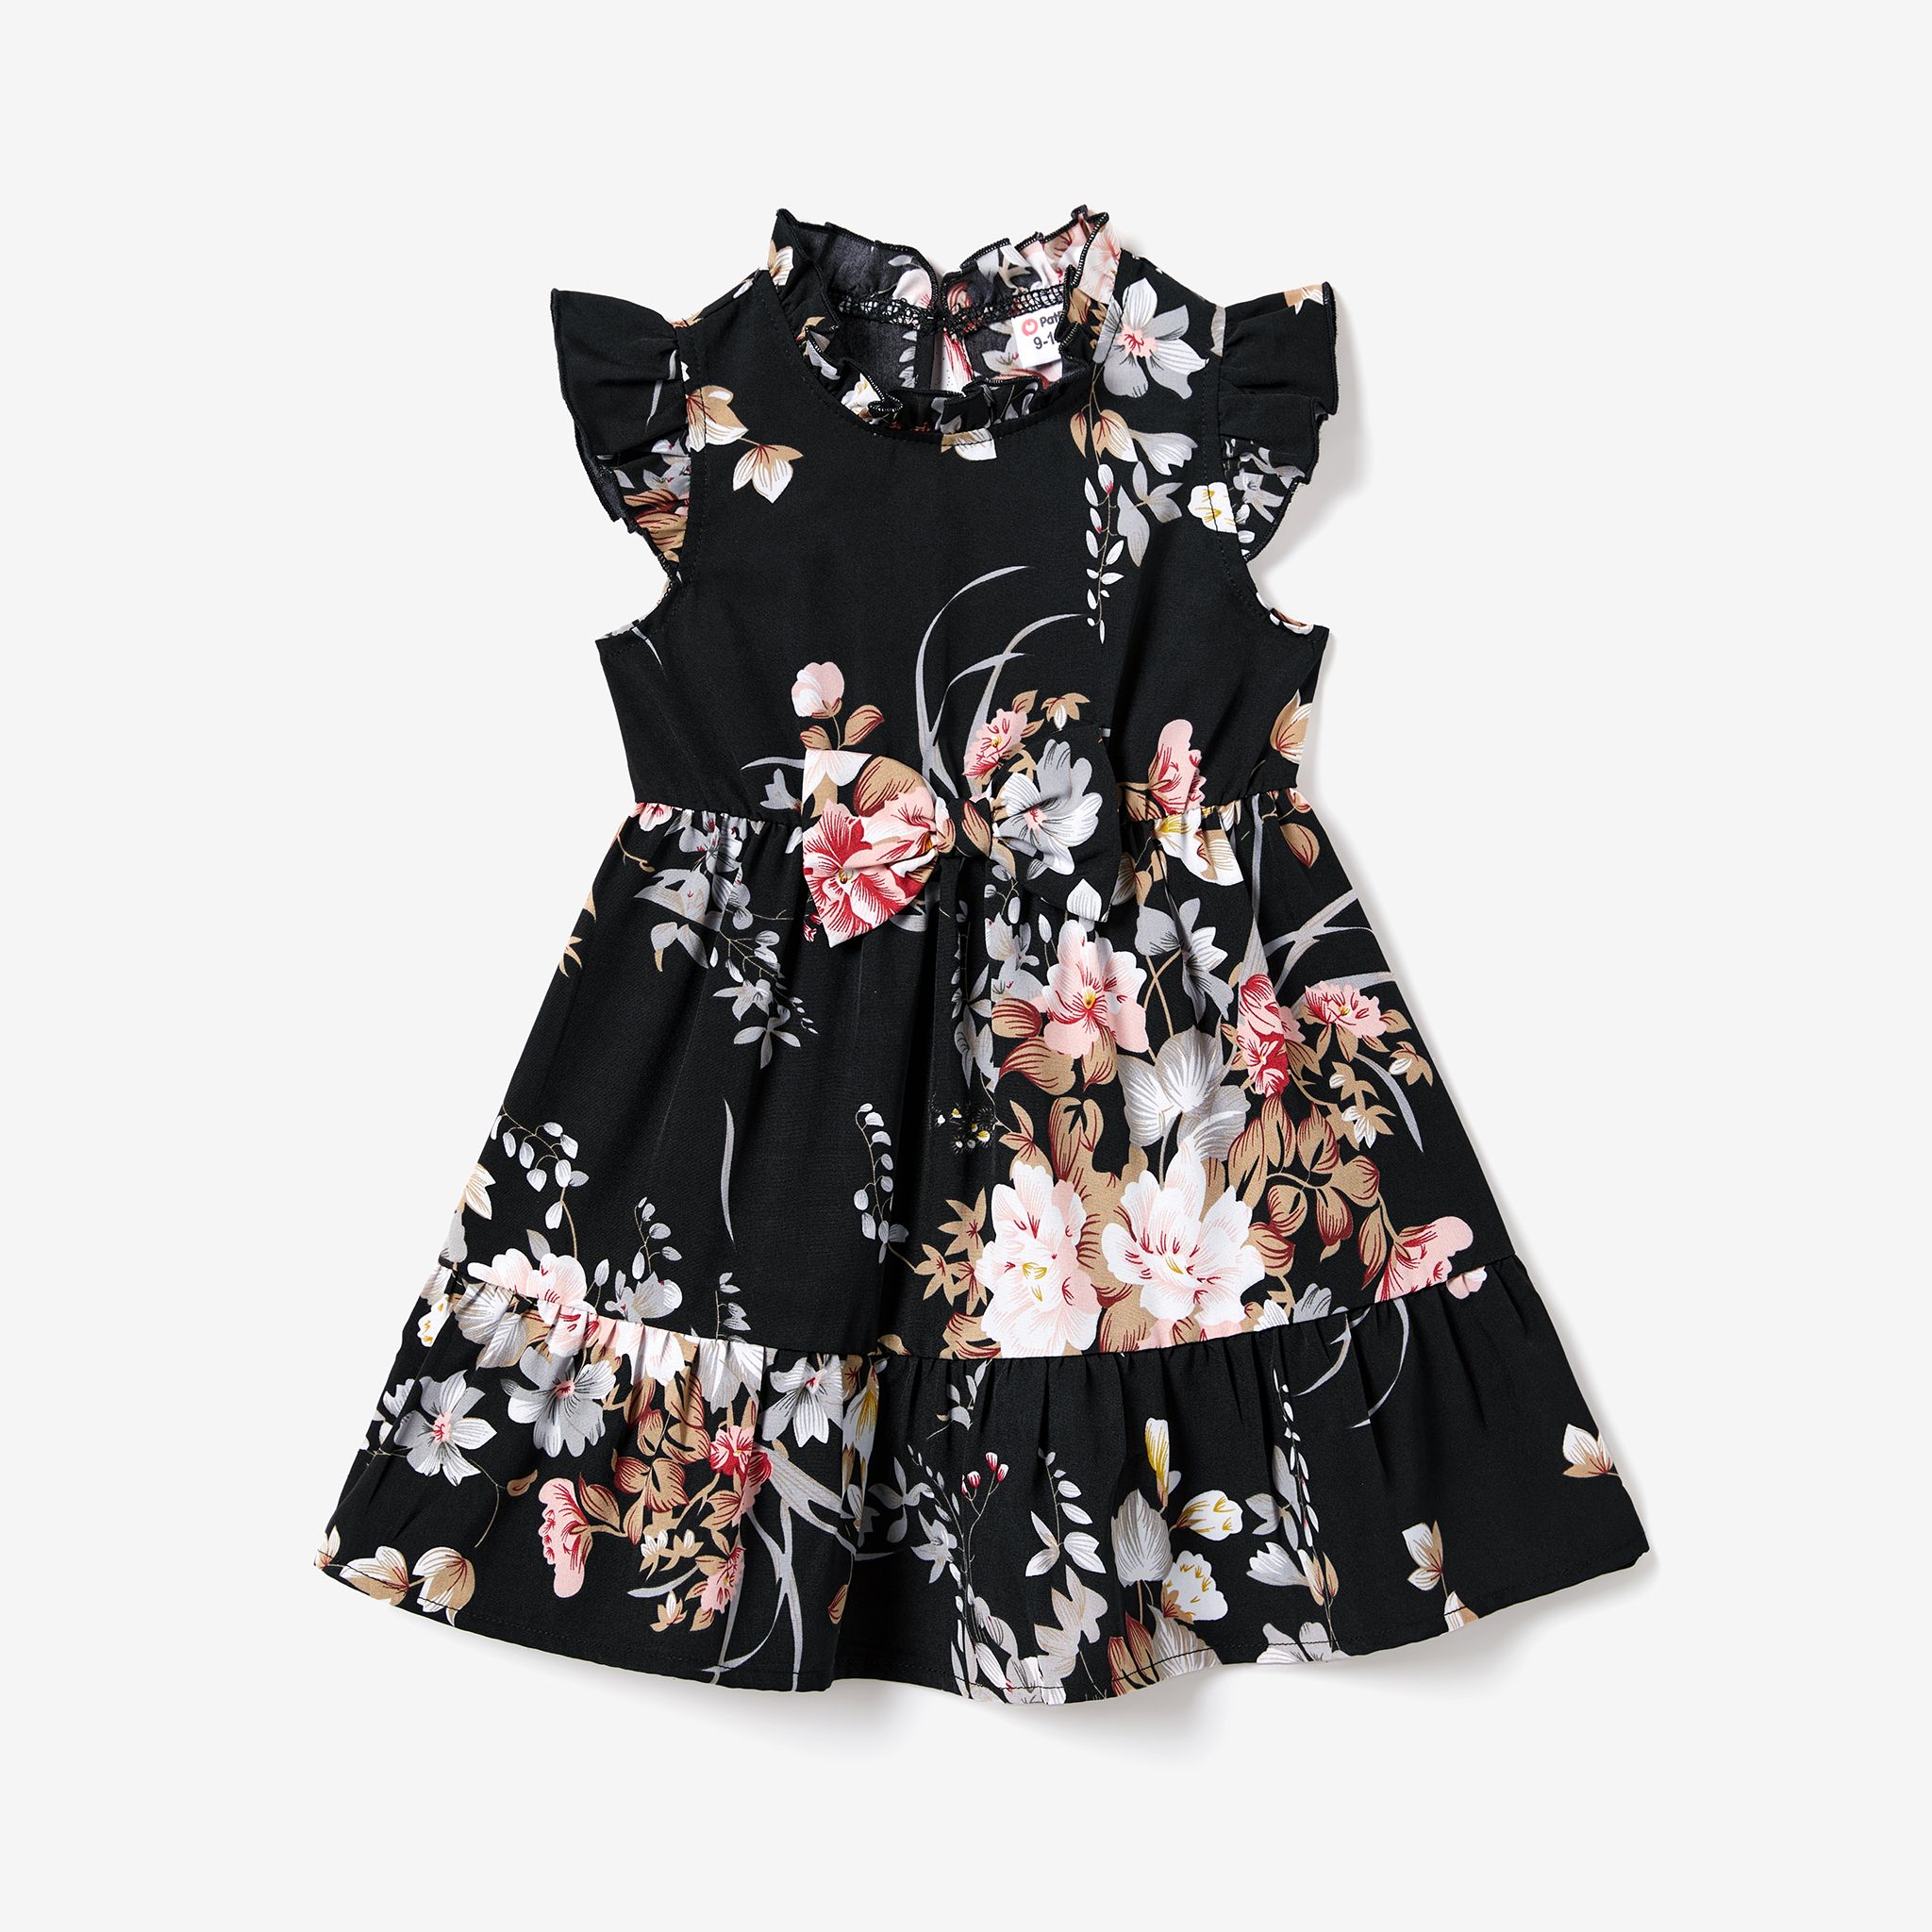 Family Matching Solid Color Black Raglan Sleeve T-shirts And Floral Print Flutter-sleeve Bowknot Tie Neck Dresses Sets